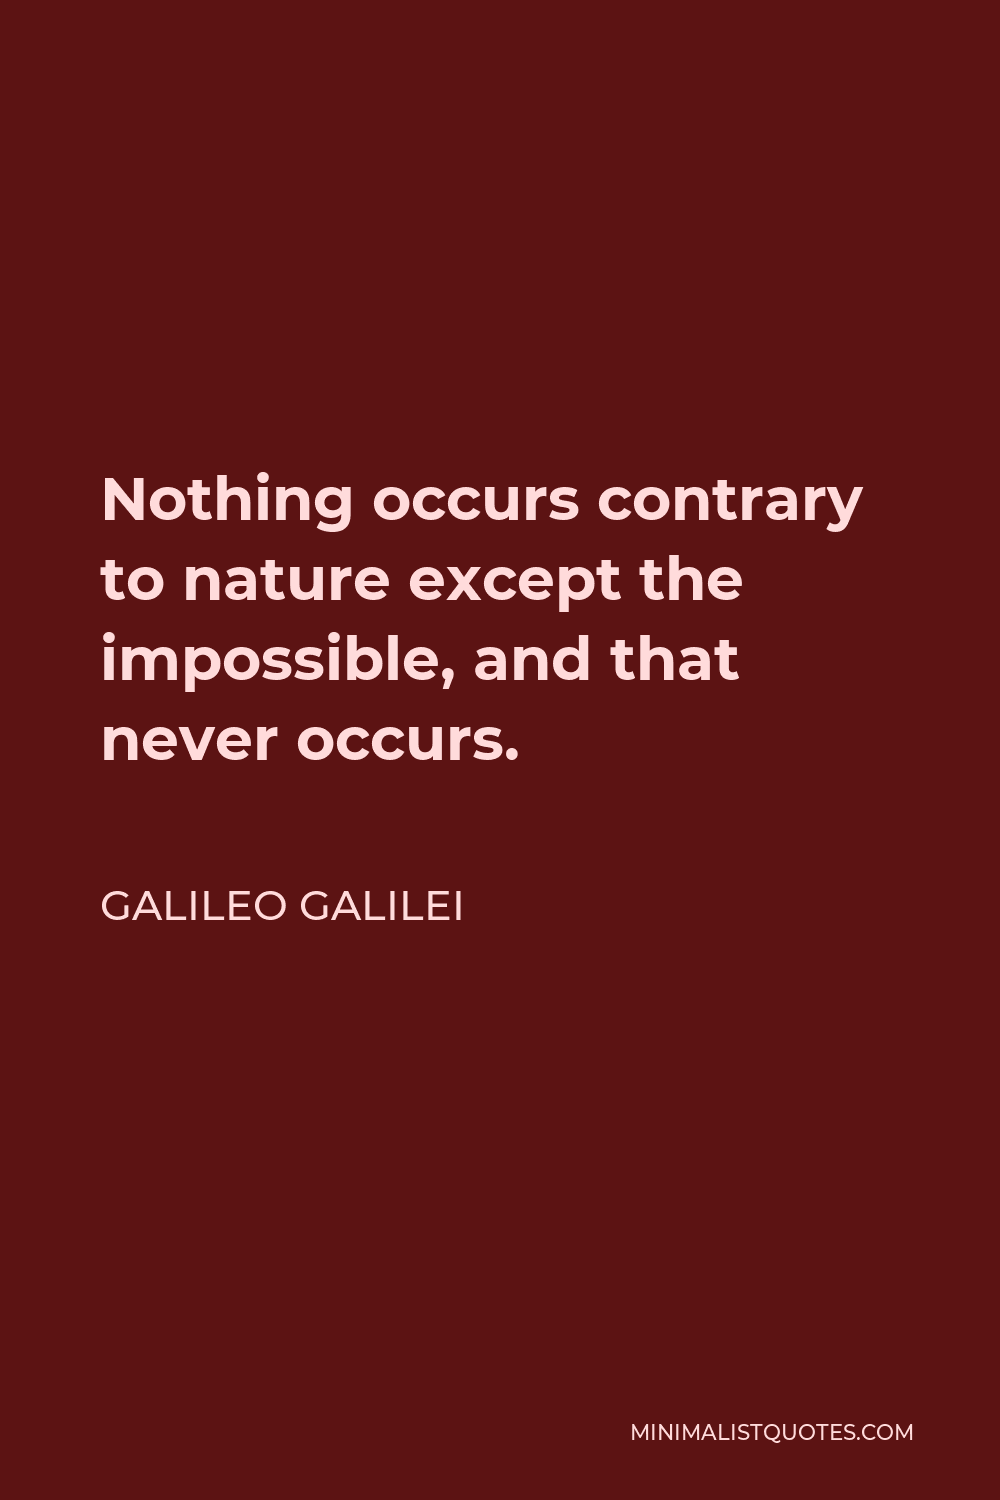 Galileo Galilei Quote - Nothing occurs contrary to nature except the impossible, and that never occurs.